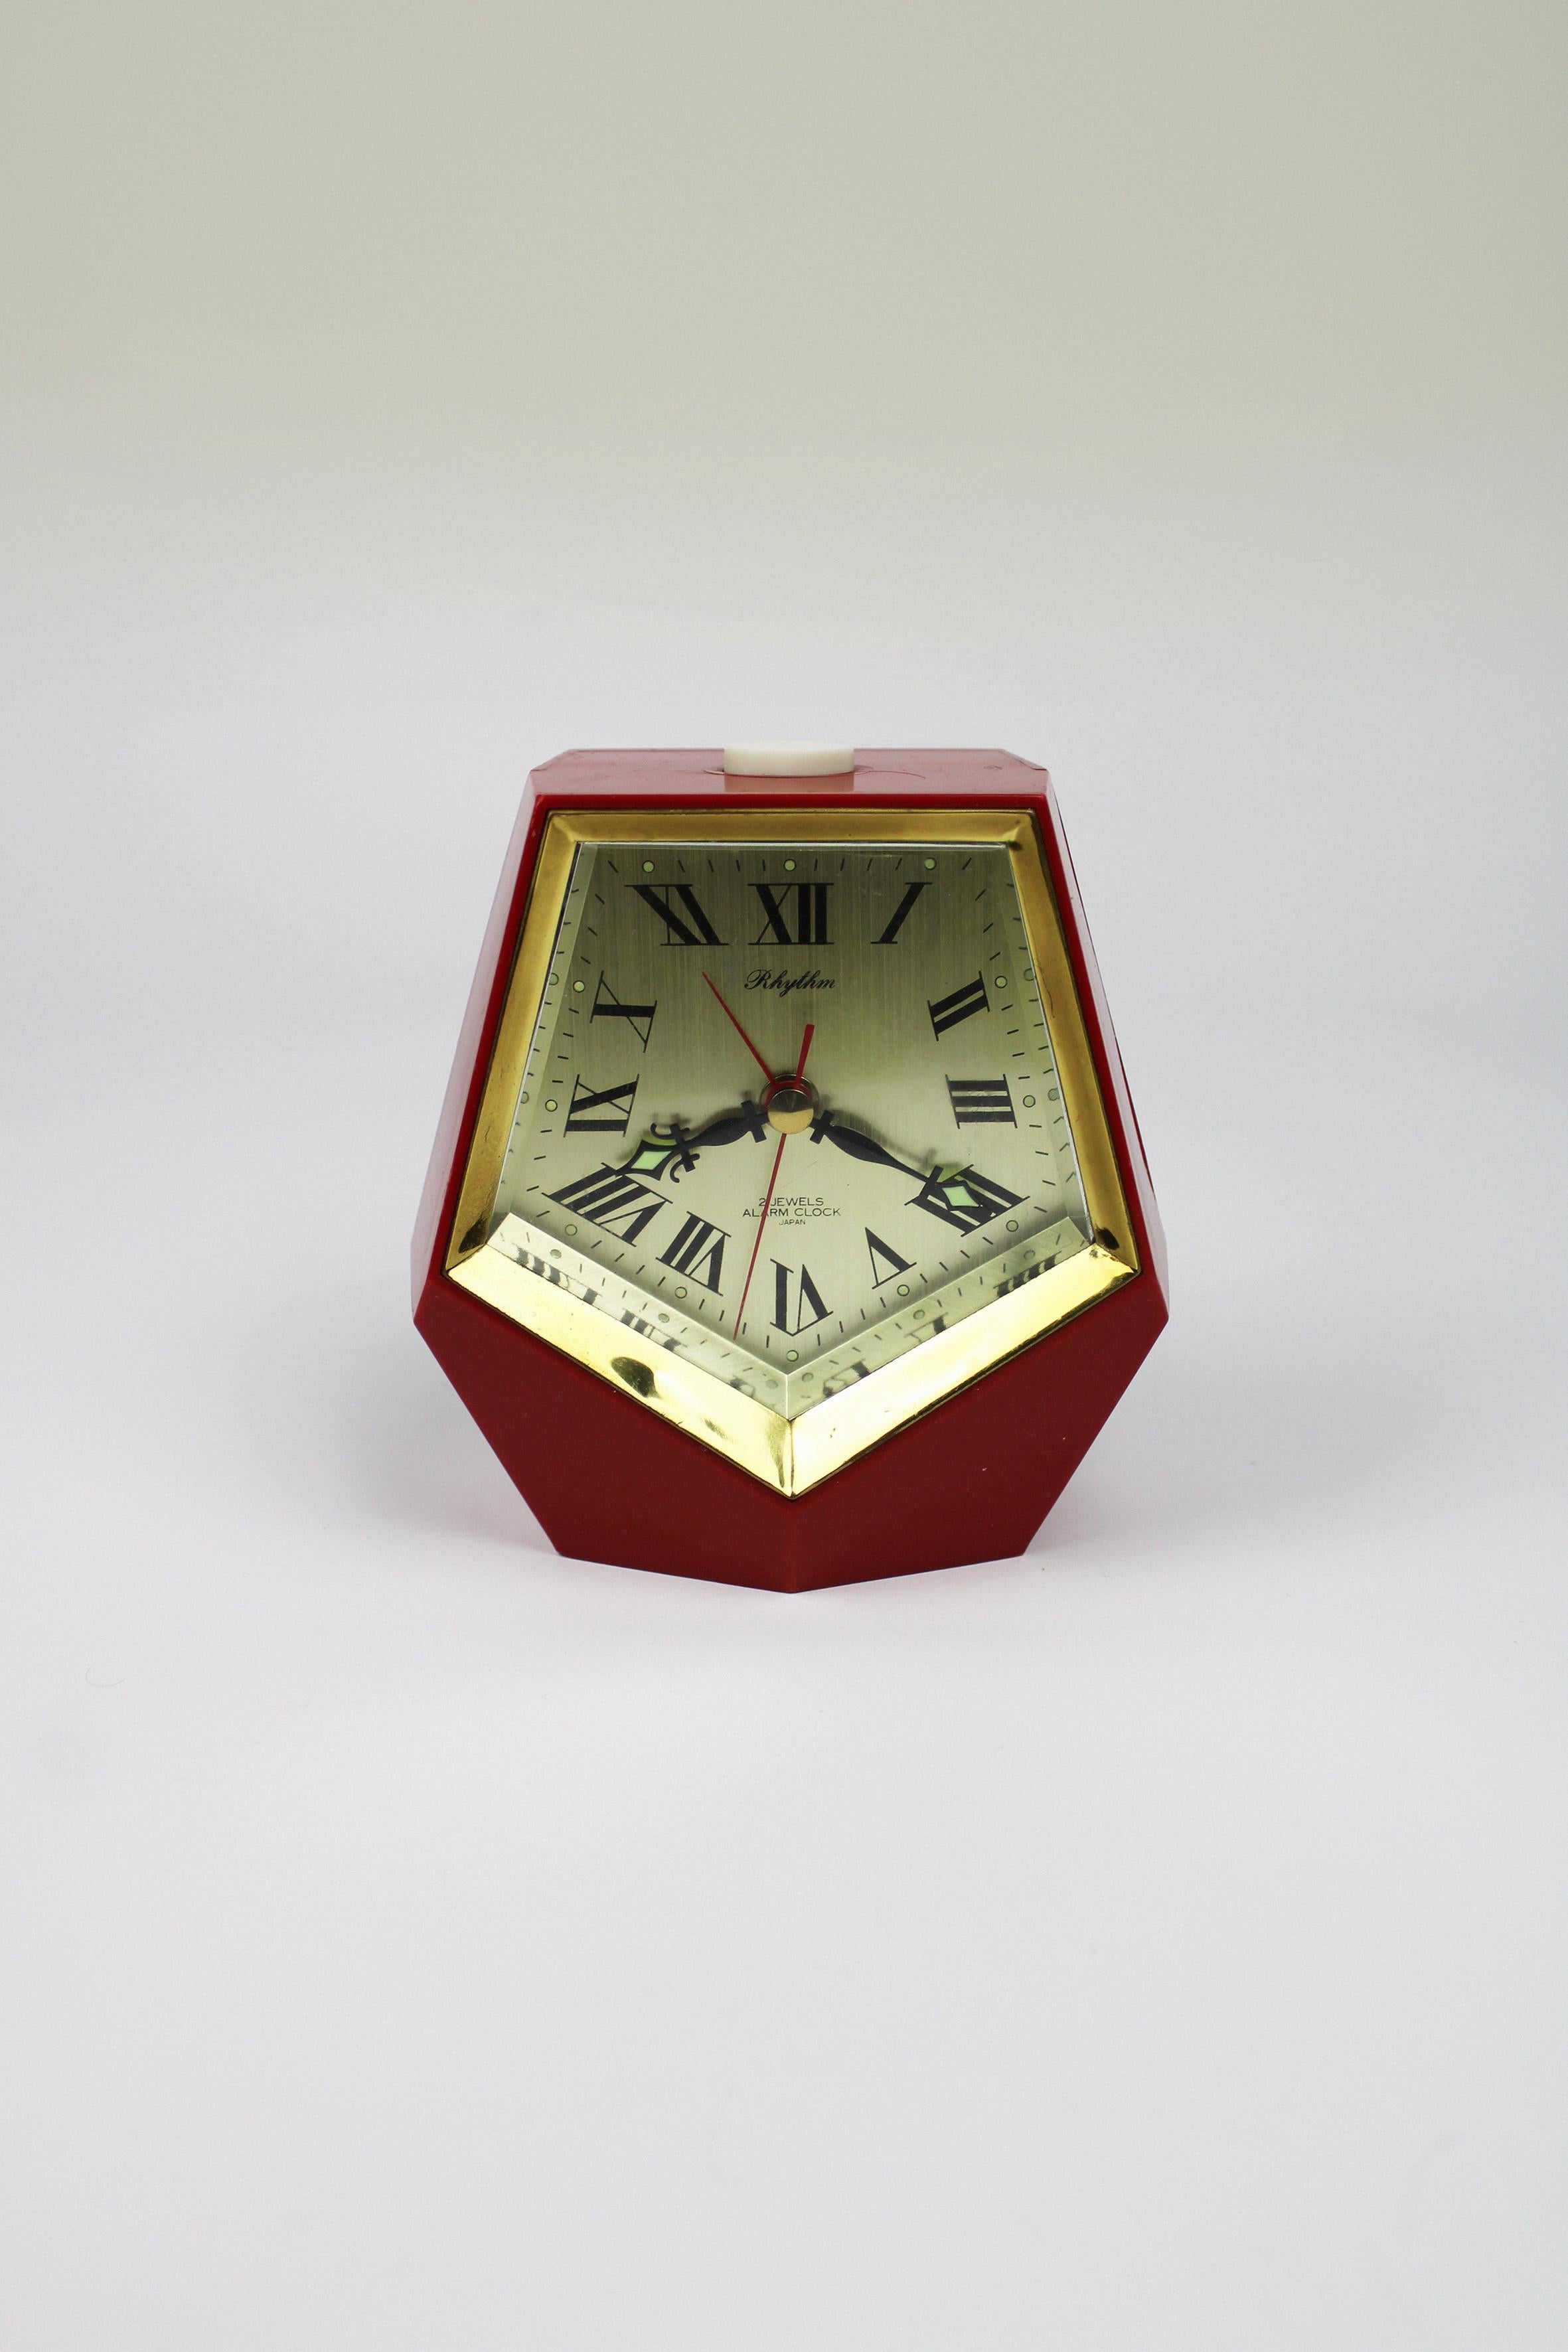 Space Age Alarm Clock Rhythm 1960s Japan Vintage Red Gold Hexadecahedron